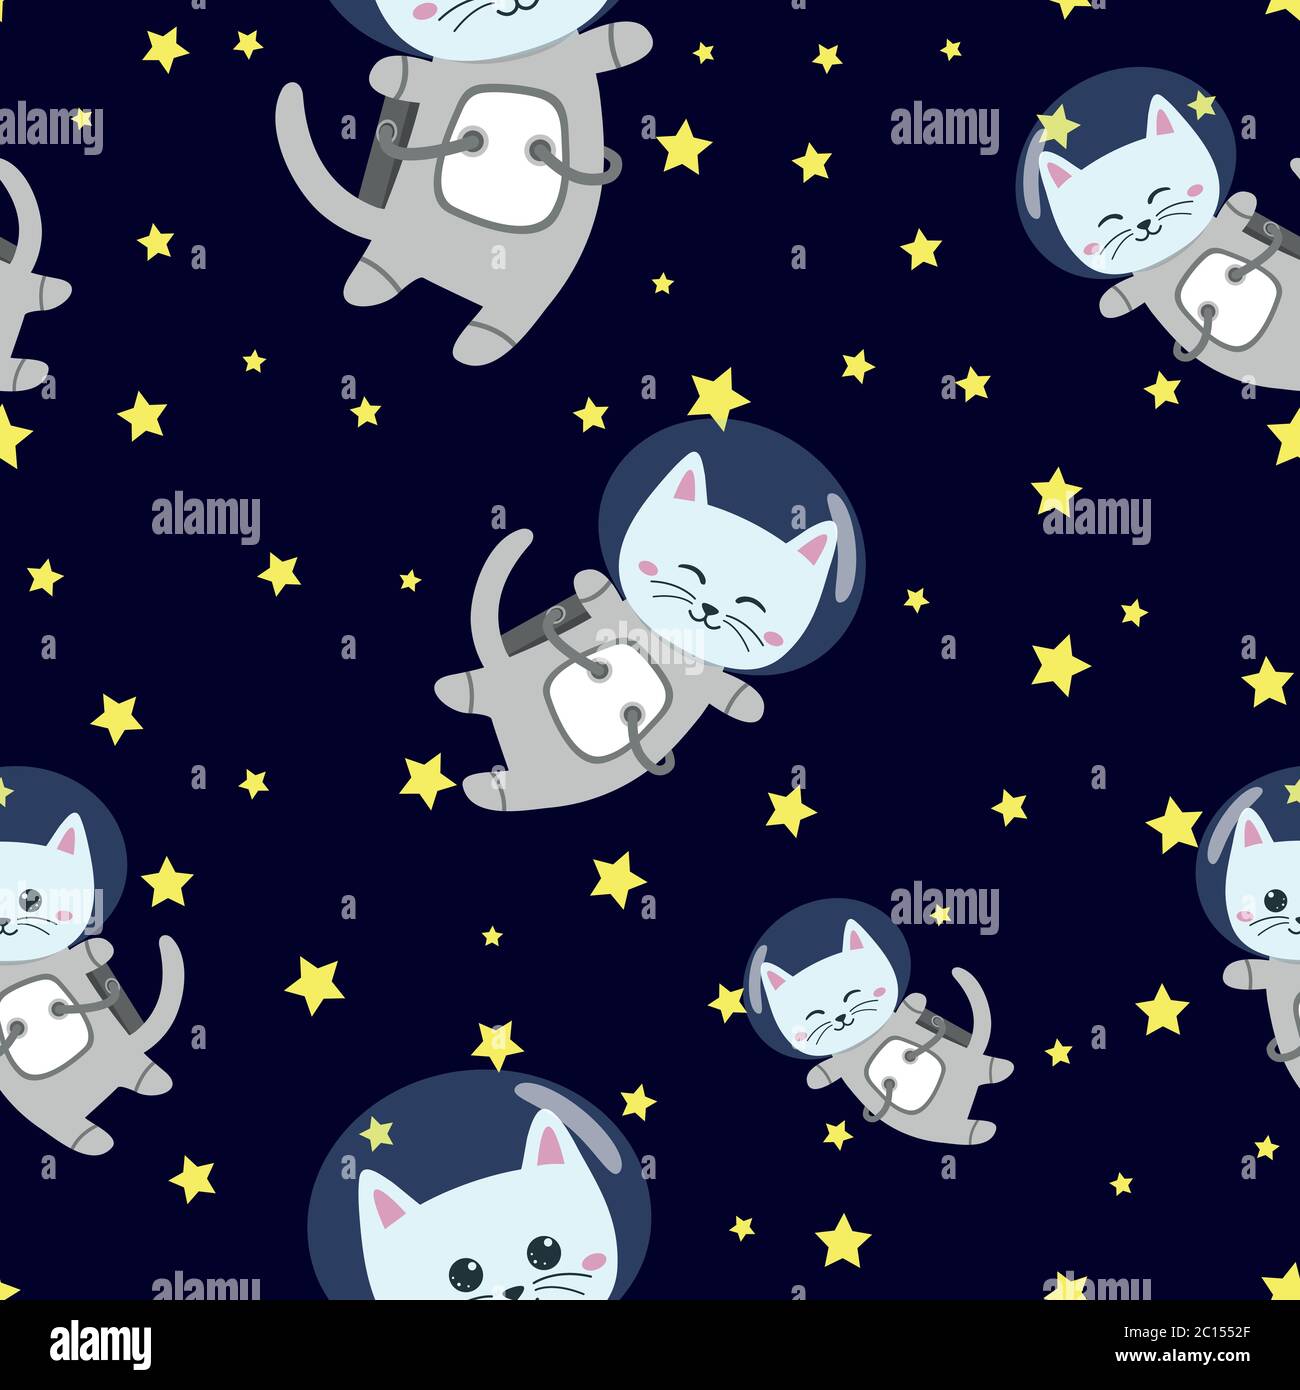 Cute cat astronaut pattern on space background Stock Vector